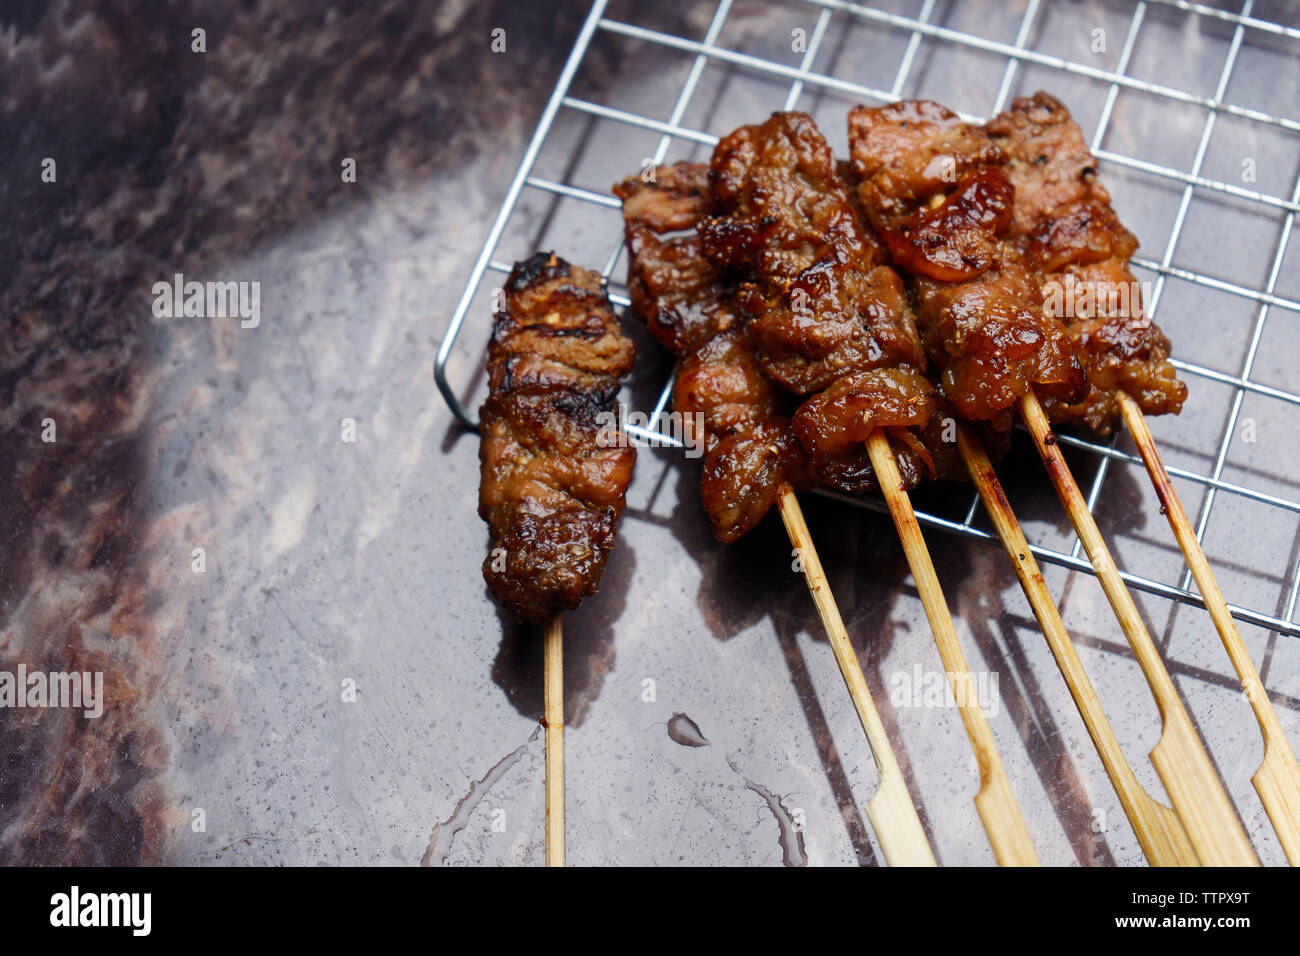 High angle view of grilled meats in skewers on metal grate over table Stock Photo